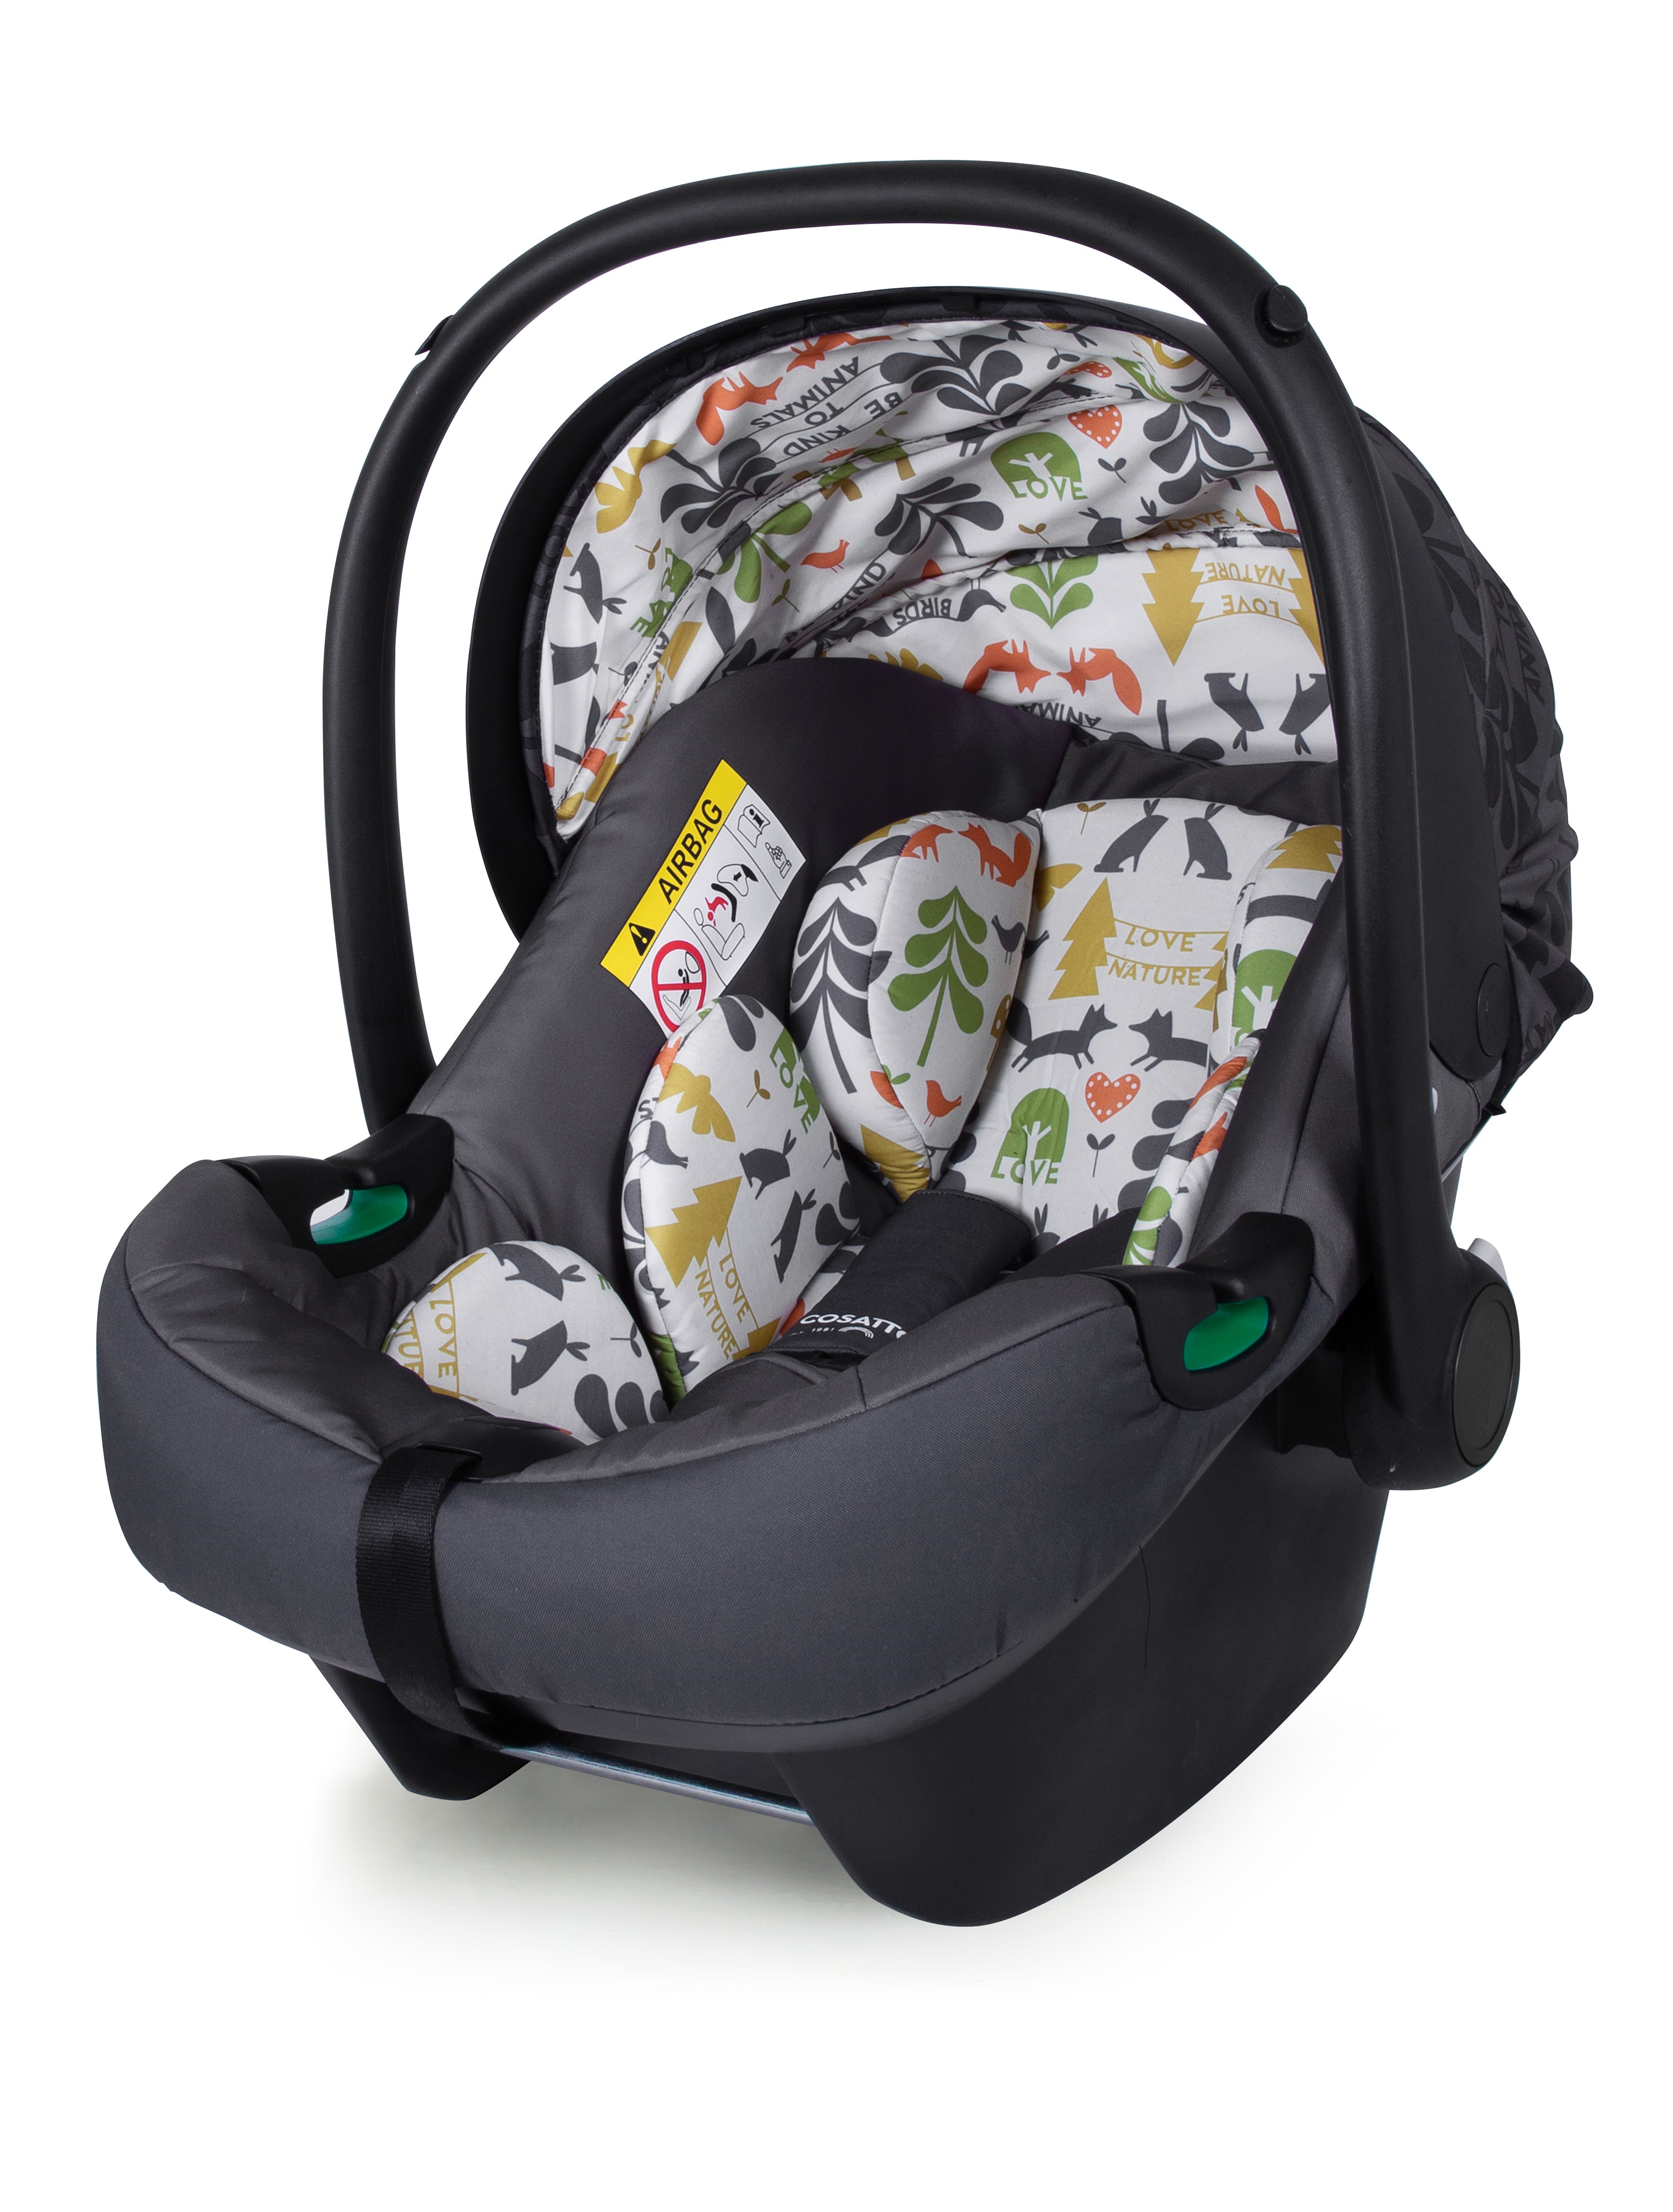 Giggle 3 in 1 Gesamt Set -  Nature Trail